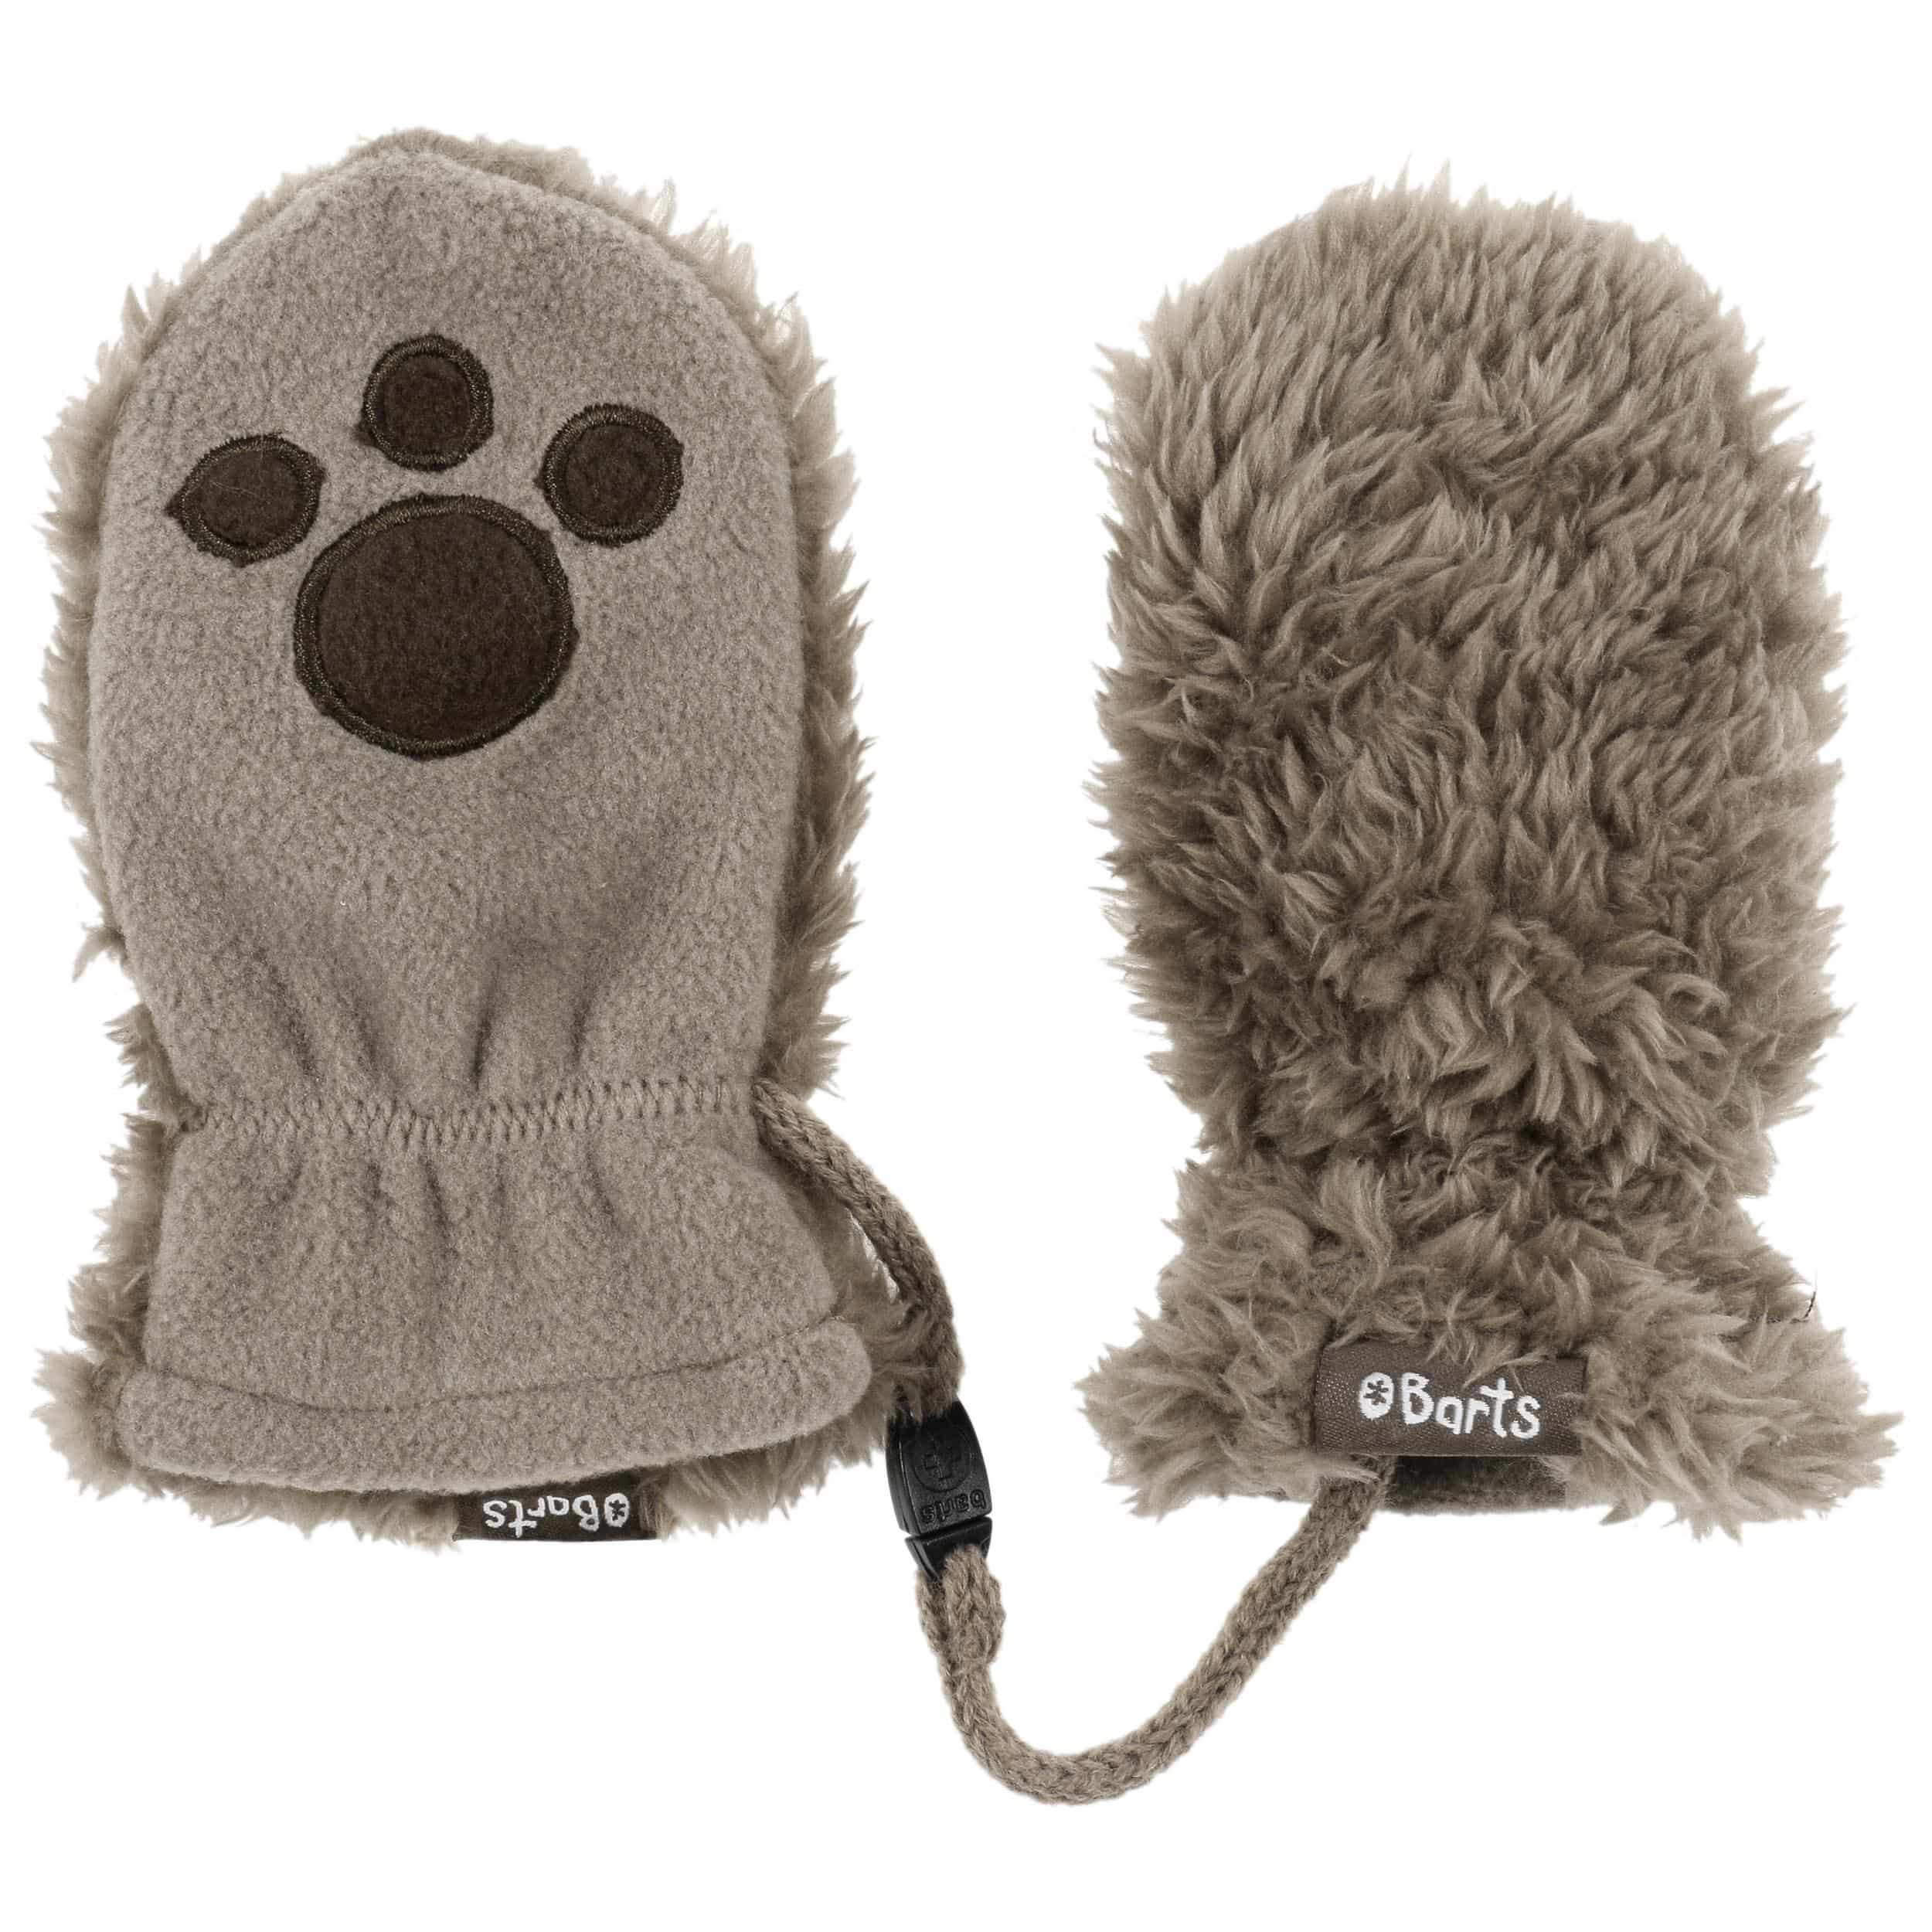 Paws Kinder by Barts - 24,99 €